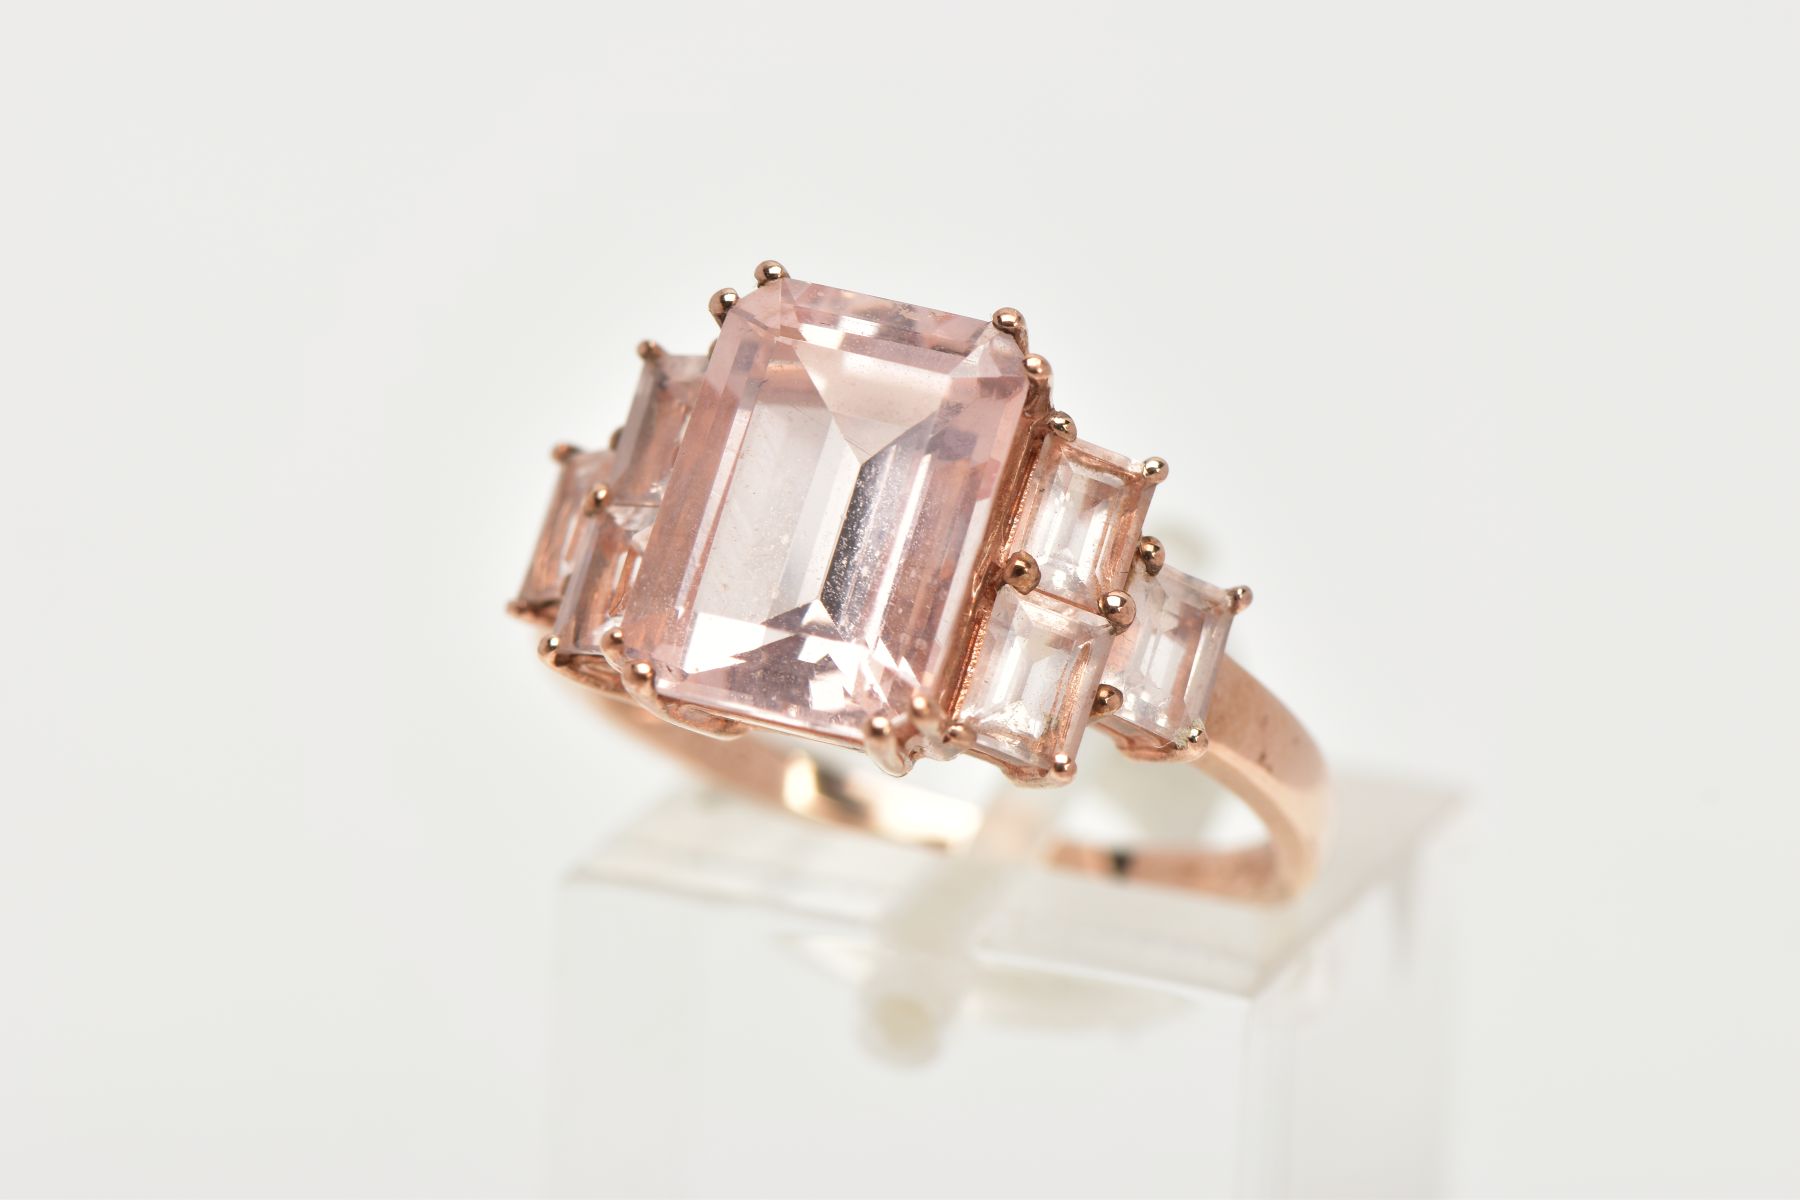 A 9CT ROSE GOLD MORGANITE DRESS RING, of a tiered design, set with a central rectangular cut